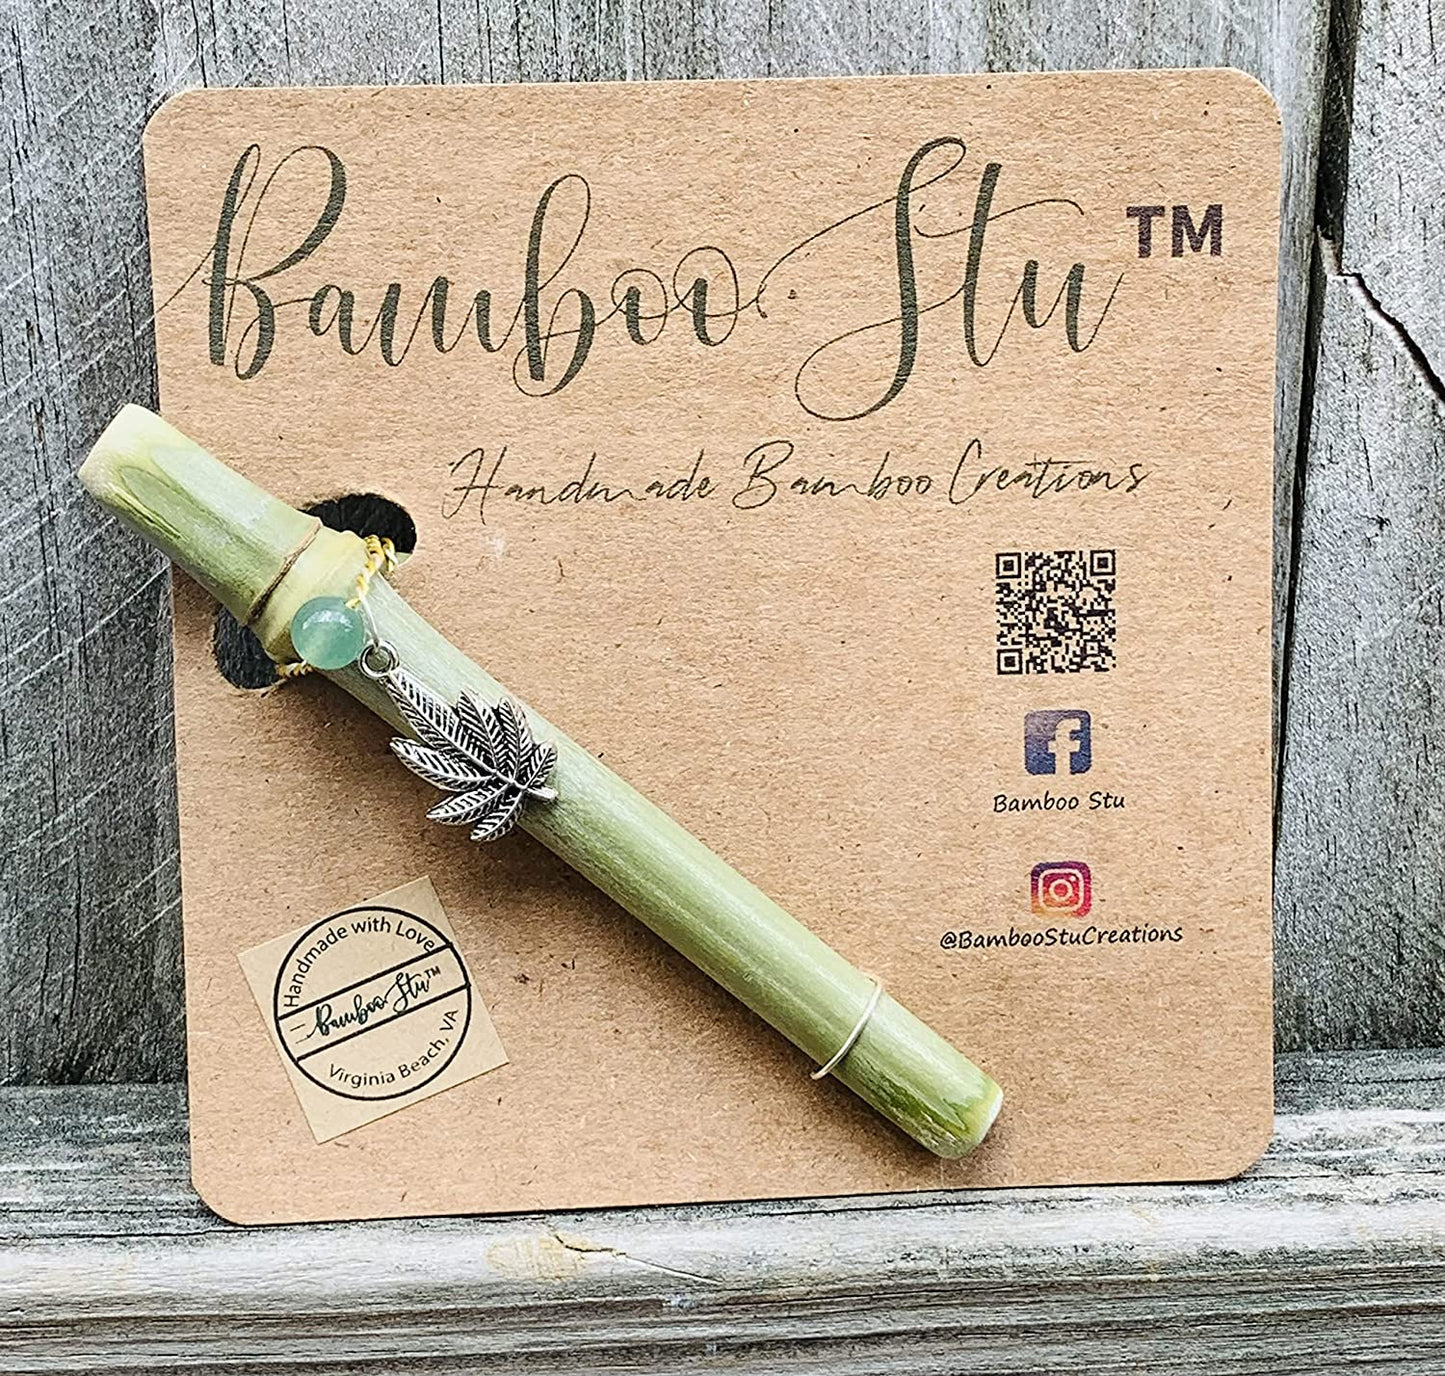 Stuletto Classic Bamboo Smoke Holder with Built-in Stand yoga smokes yoga studio, delivery, delivery near me, yoga smokes smoke shop, find smoke shop, head shop near me, yoga studio, headshop, head shop, local smoke shop, psl, psl smoke shop, smoke shop, smokeshop, yoga, yoga studio, dispensary, local dispensary, smokeshop near me, port saint lucie, florida, port st lucie, lounge, life, highlife, love, stoned, highsociety. Yoga Smokes Canna Leaf